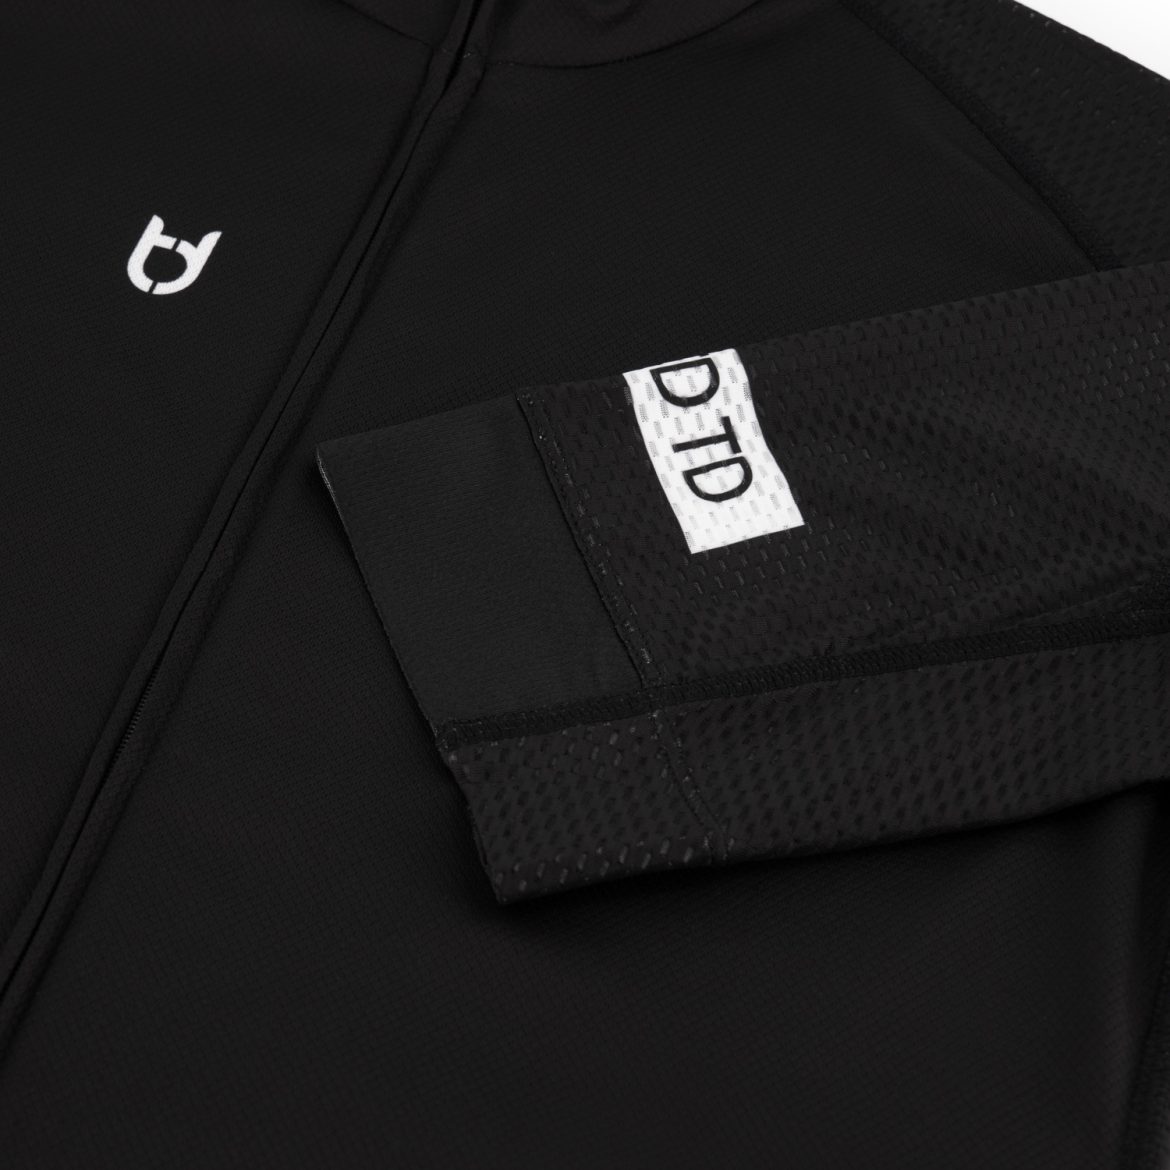 Detail photo mesh sleeves of TD black cycling jersey